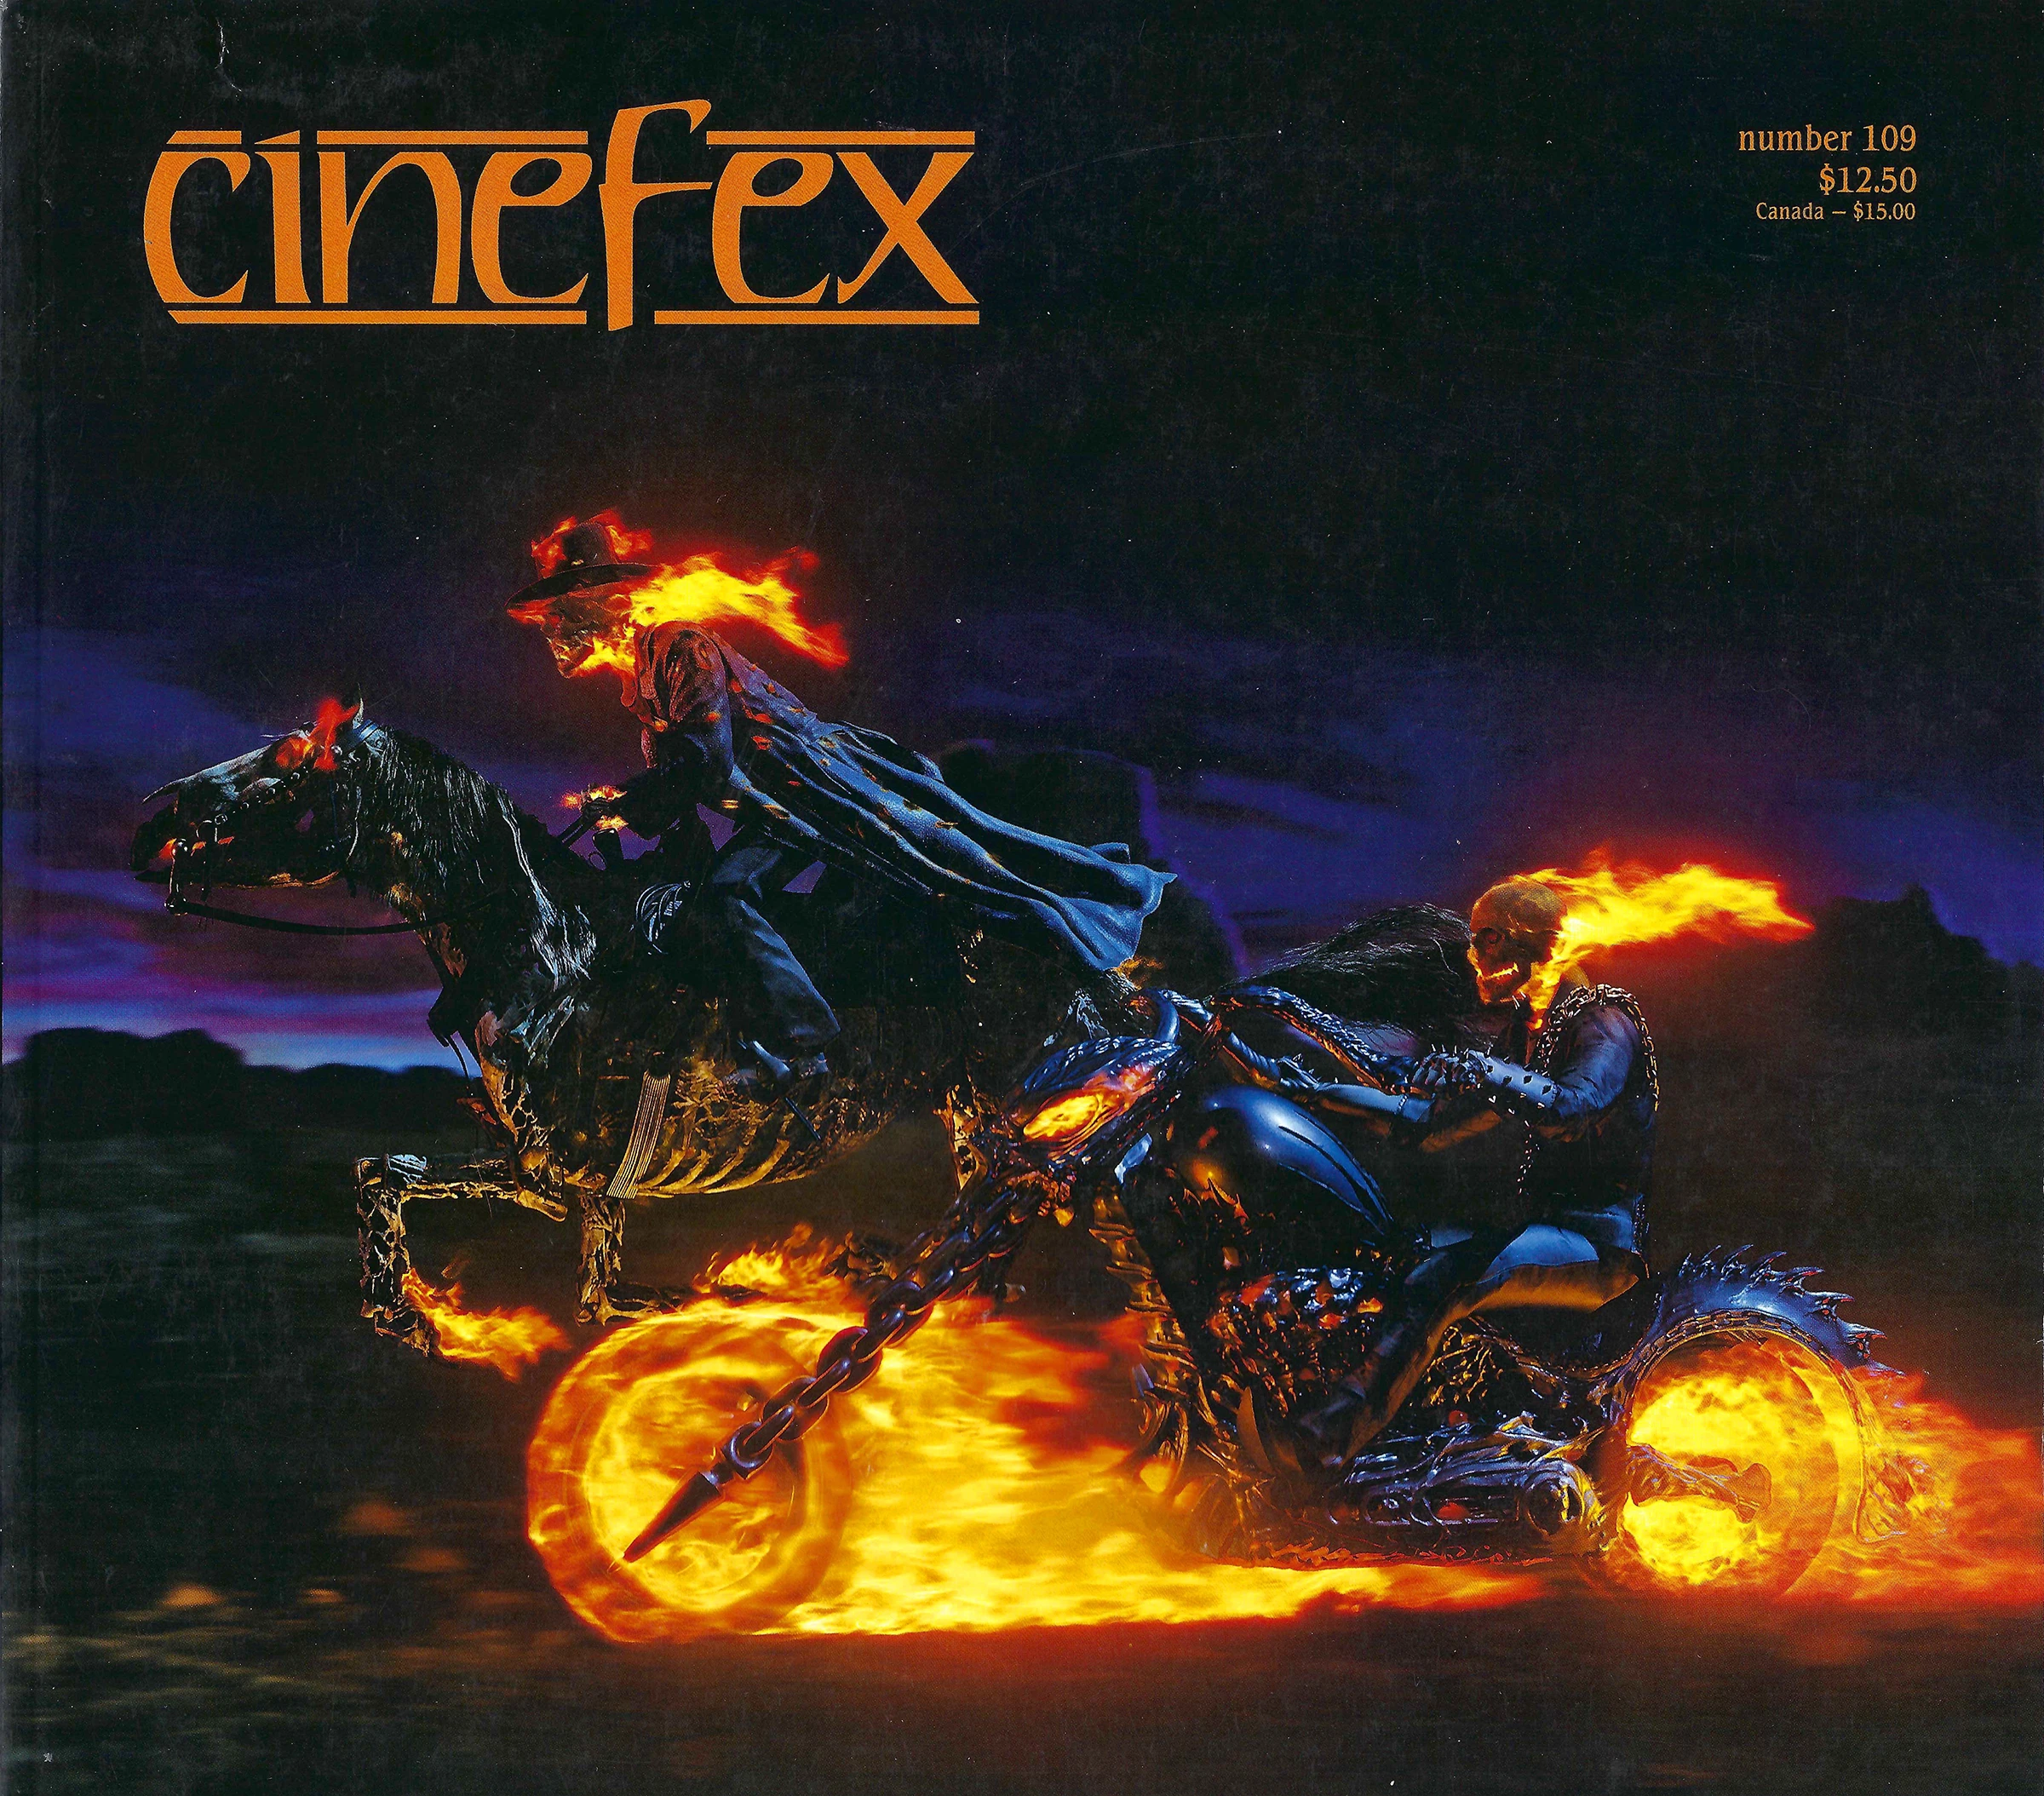 Cover of CineFex 109 showing GhostRider on motorcycle and original GhostRider on horse.